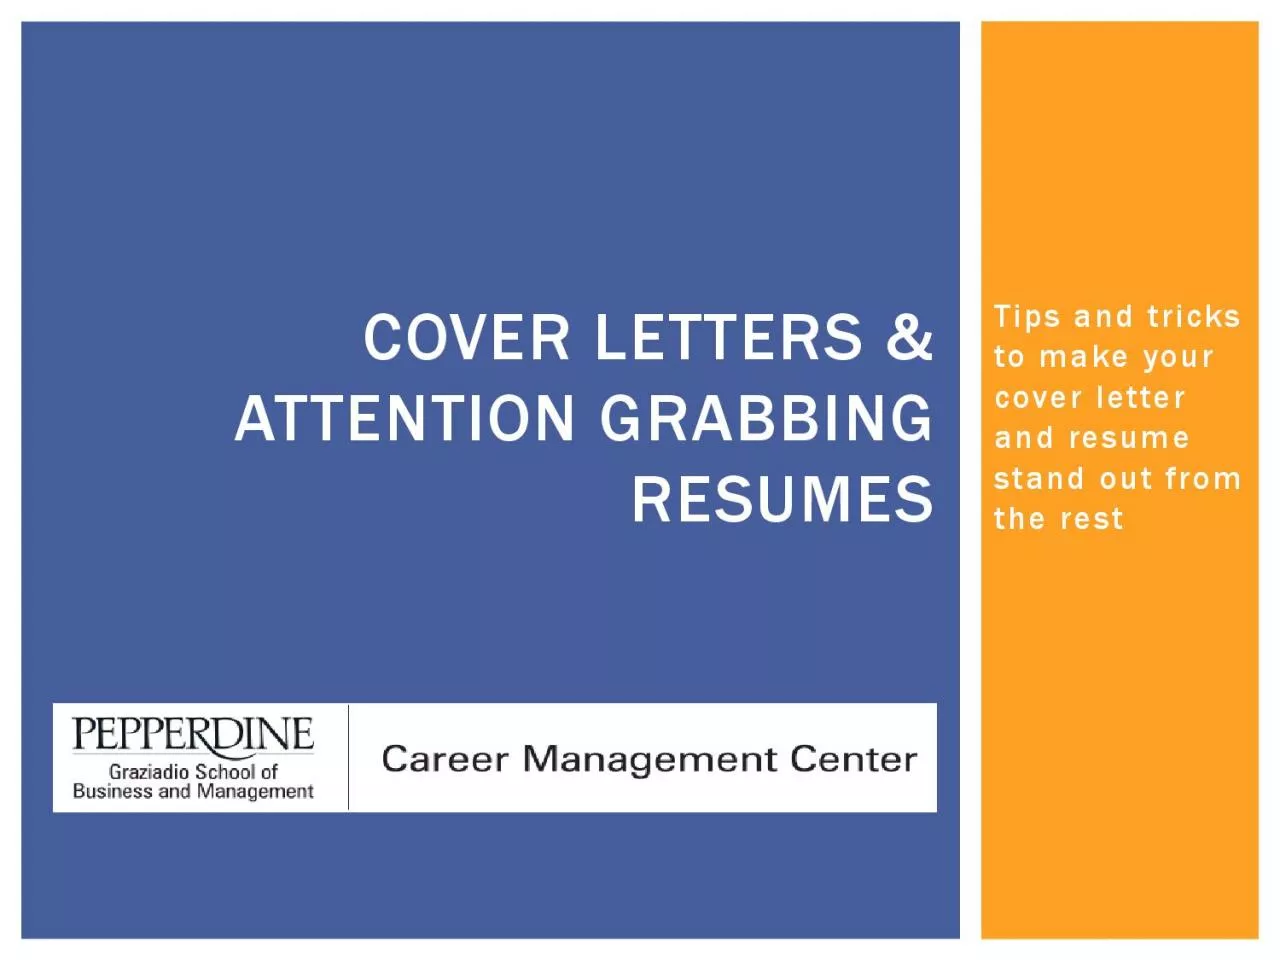 Tips and tricks to make your cover letter and resume stand out from th